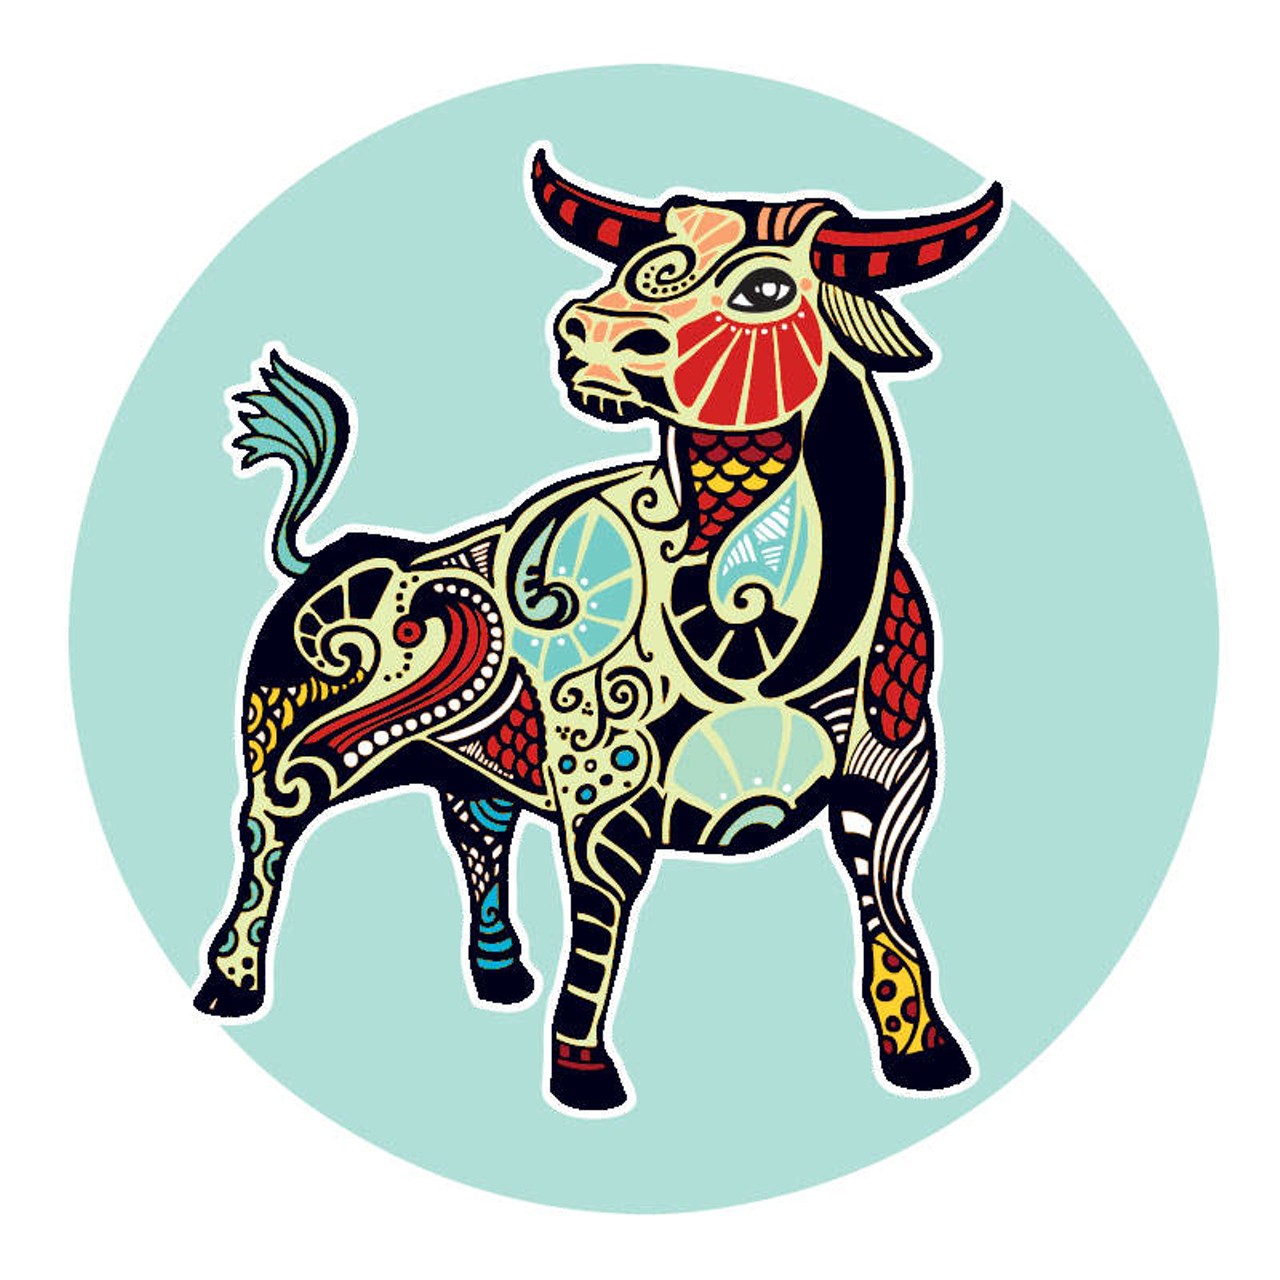 TAURUS (April 21-May 20): You have everything going for you and huge opportunities to take whatever you're doing to the next level. There could be a lot of traveling going on. The urge to bring your life forward is ringing up all kinds of stuff around money. As the new paradigm informs us, you will figure out that your resources aren't made of gold. It's what you have the power to conjure up that makes you who you are. Your relationship situation is in an interesting place. Not seeing eye to eye isn't always a bad thing. Whatever seems to be out of sorts is giving you all kinds of room to adapt.